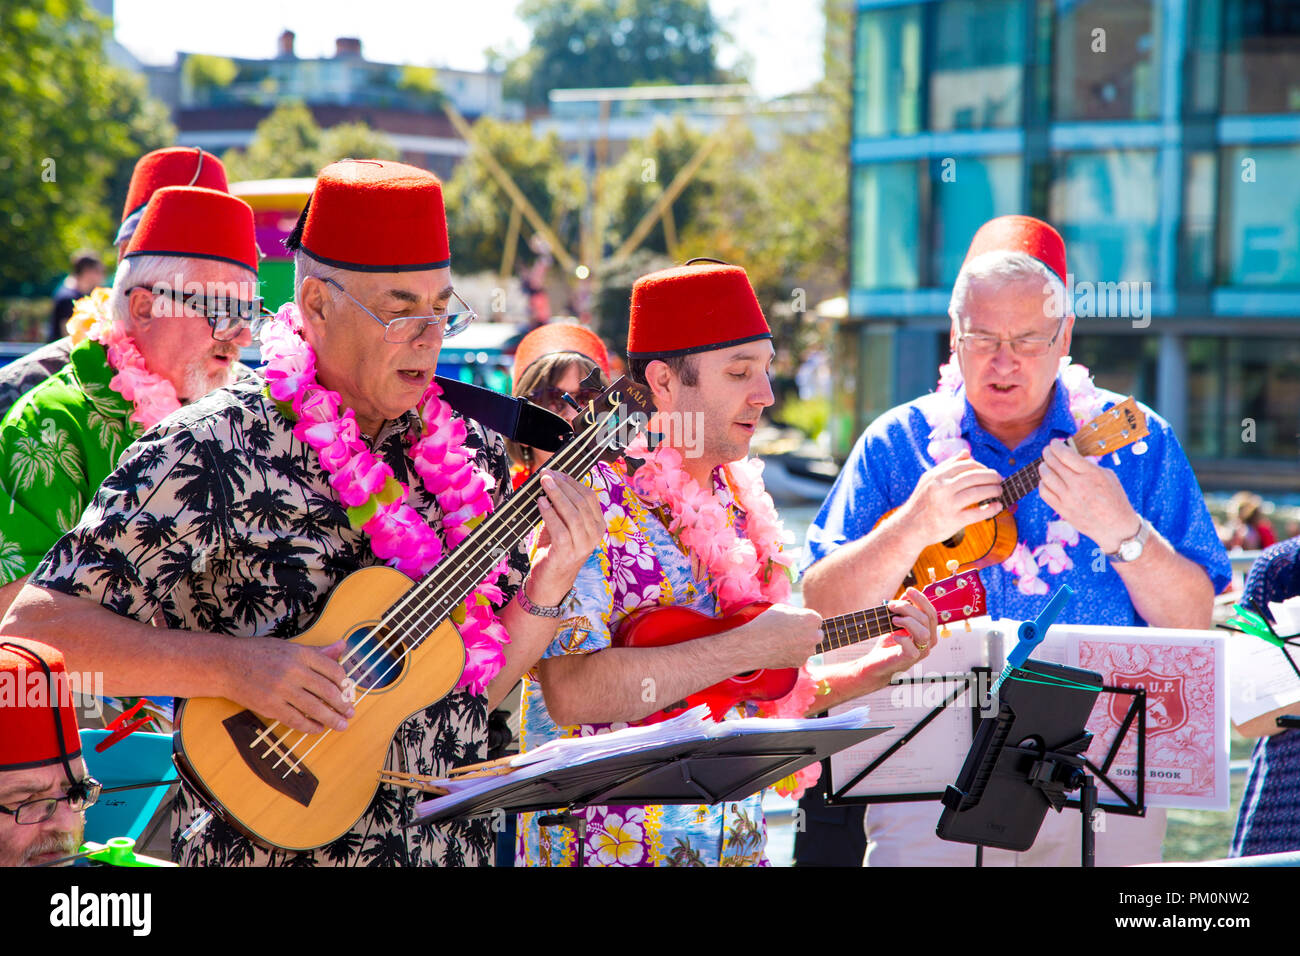 A band playing at Angel Canal Festival 2018, London, UK Stock Photo